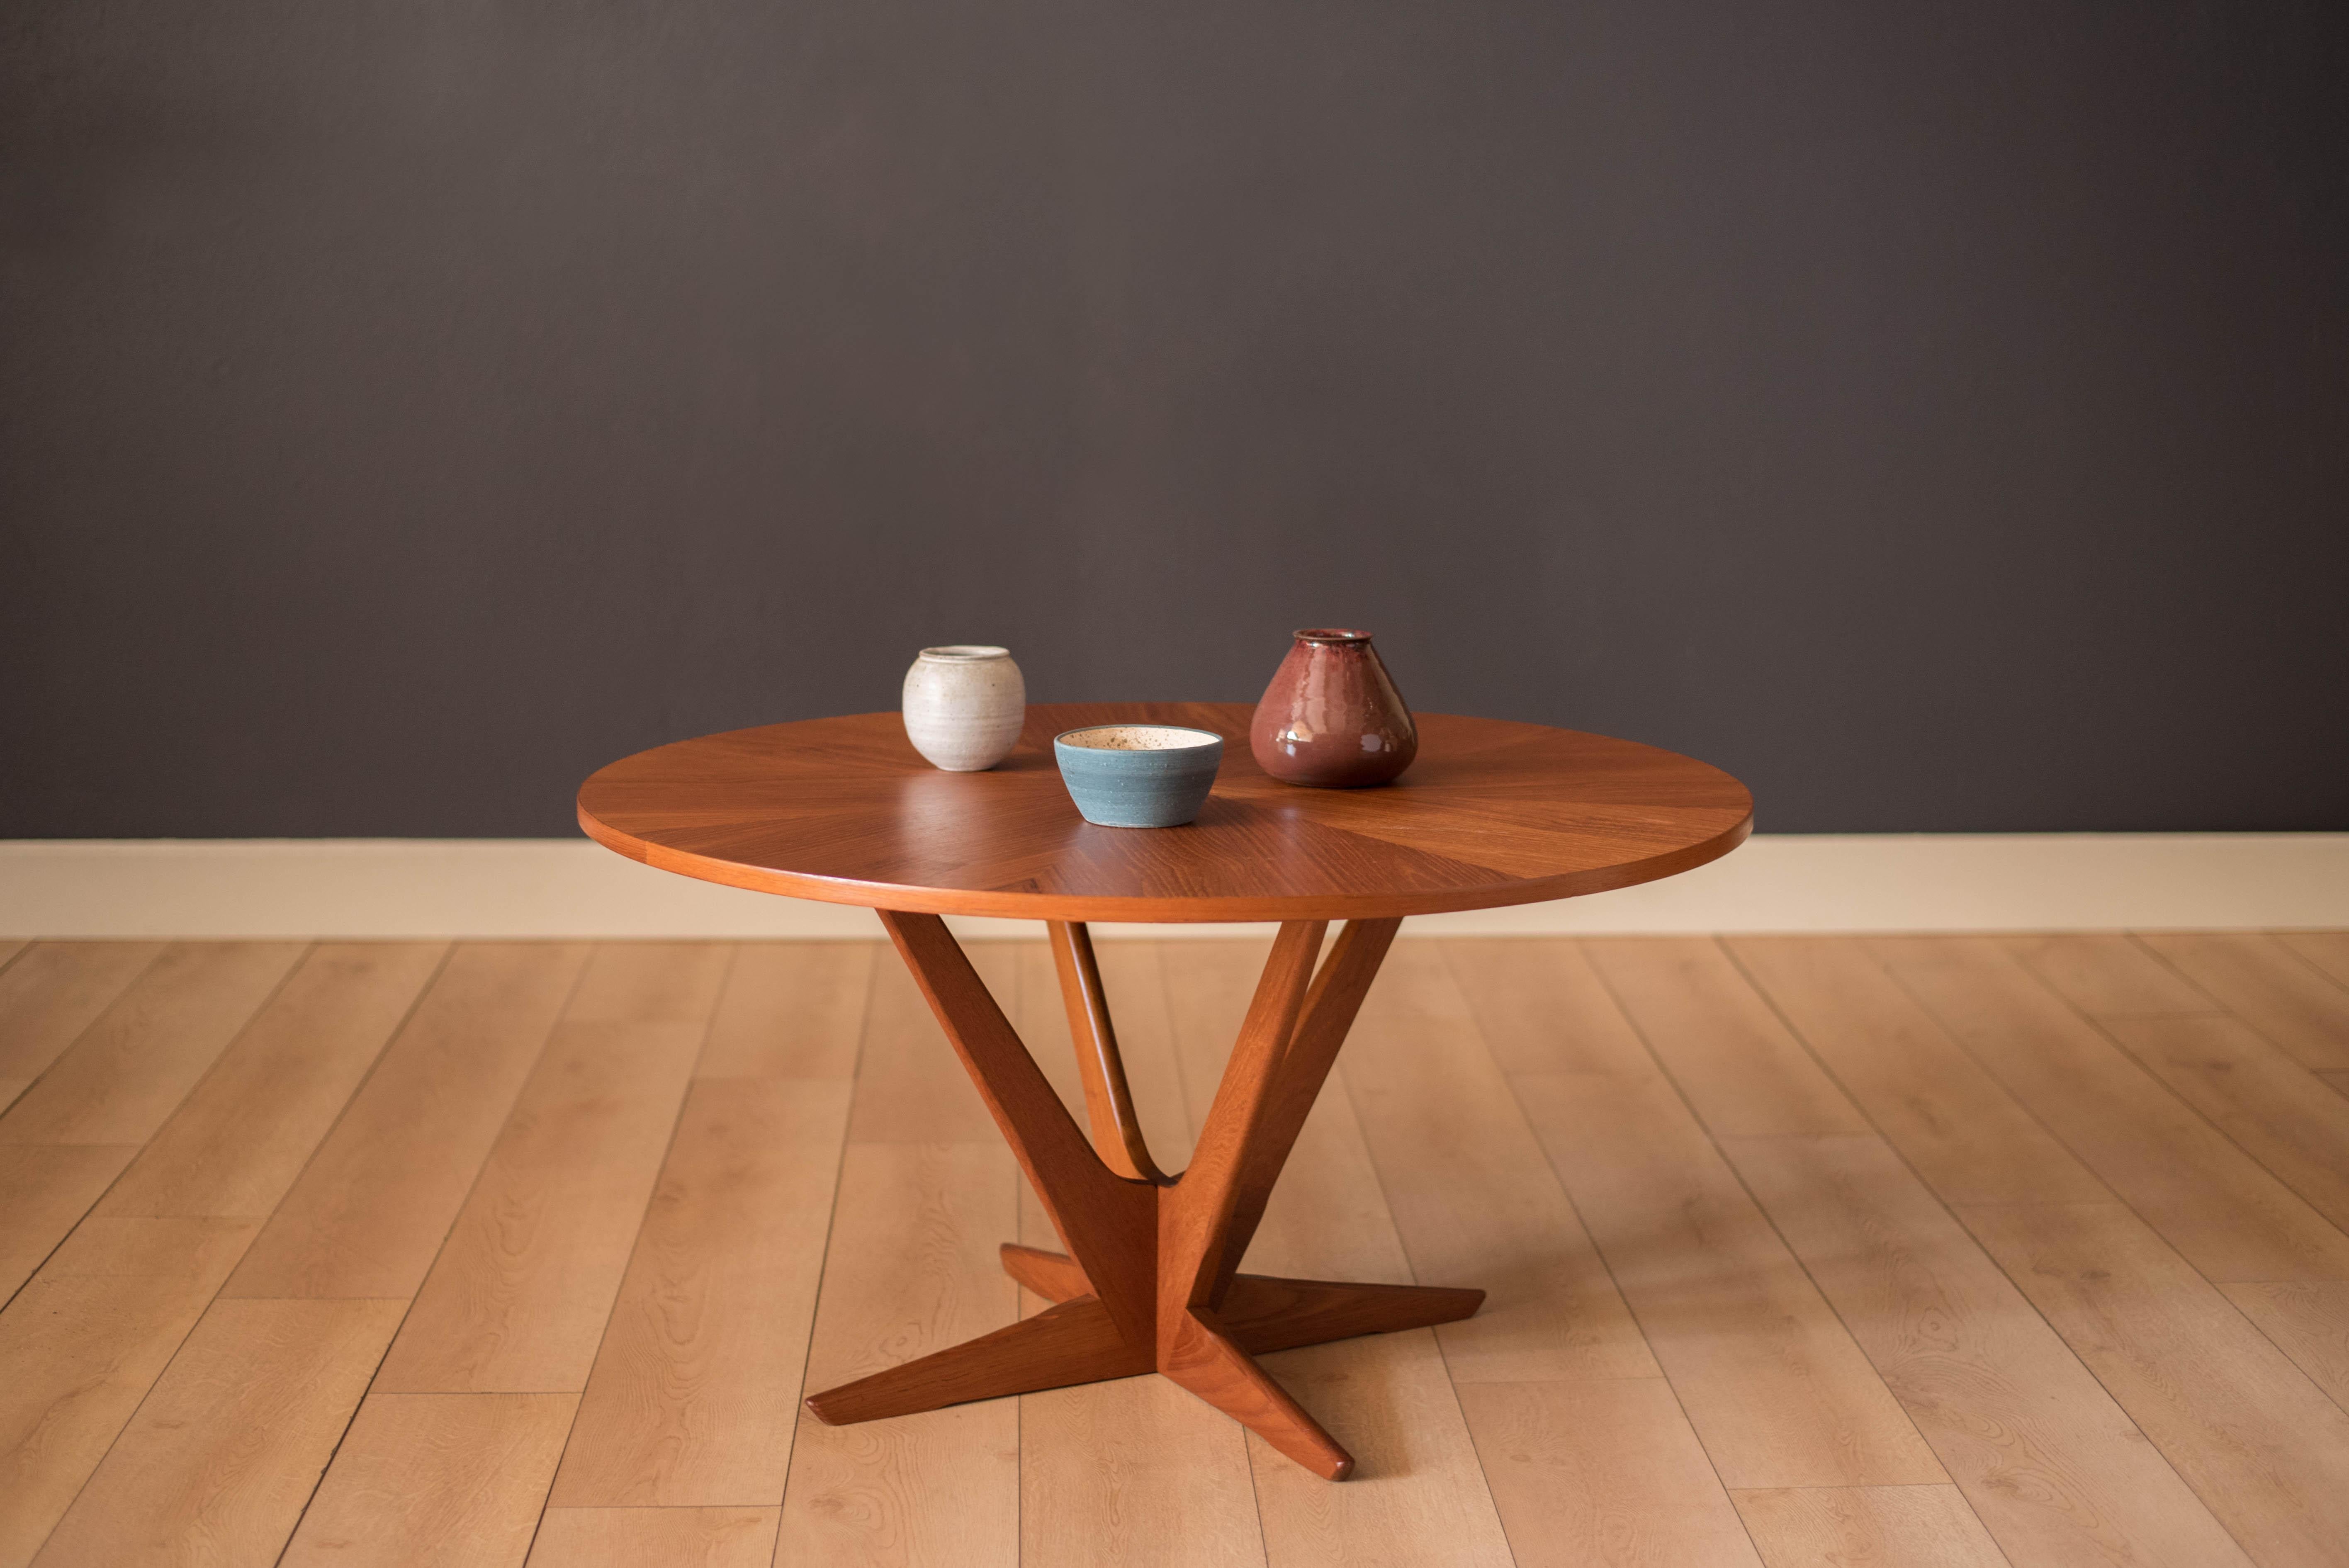 Mid-Century Modern round coffee or occasional table by Soren Georg Jensen for Kubus. The top features a stunning radial teak veneer pattern supported by a unique sculptural atomic base. Perfect to use as center table or an entryway foyer piece.